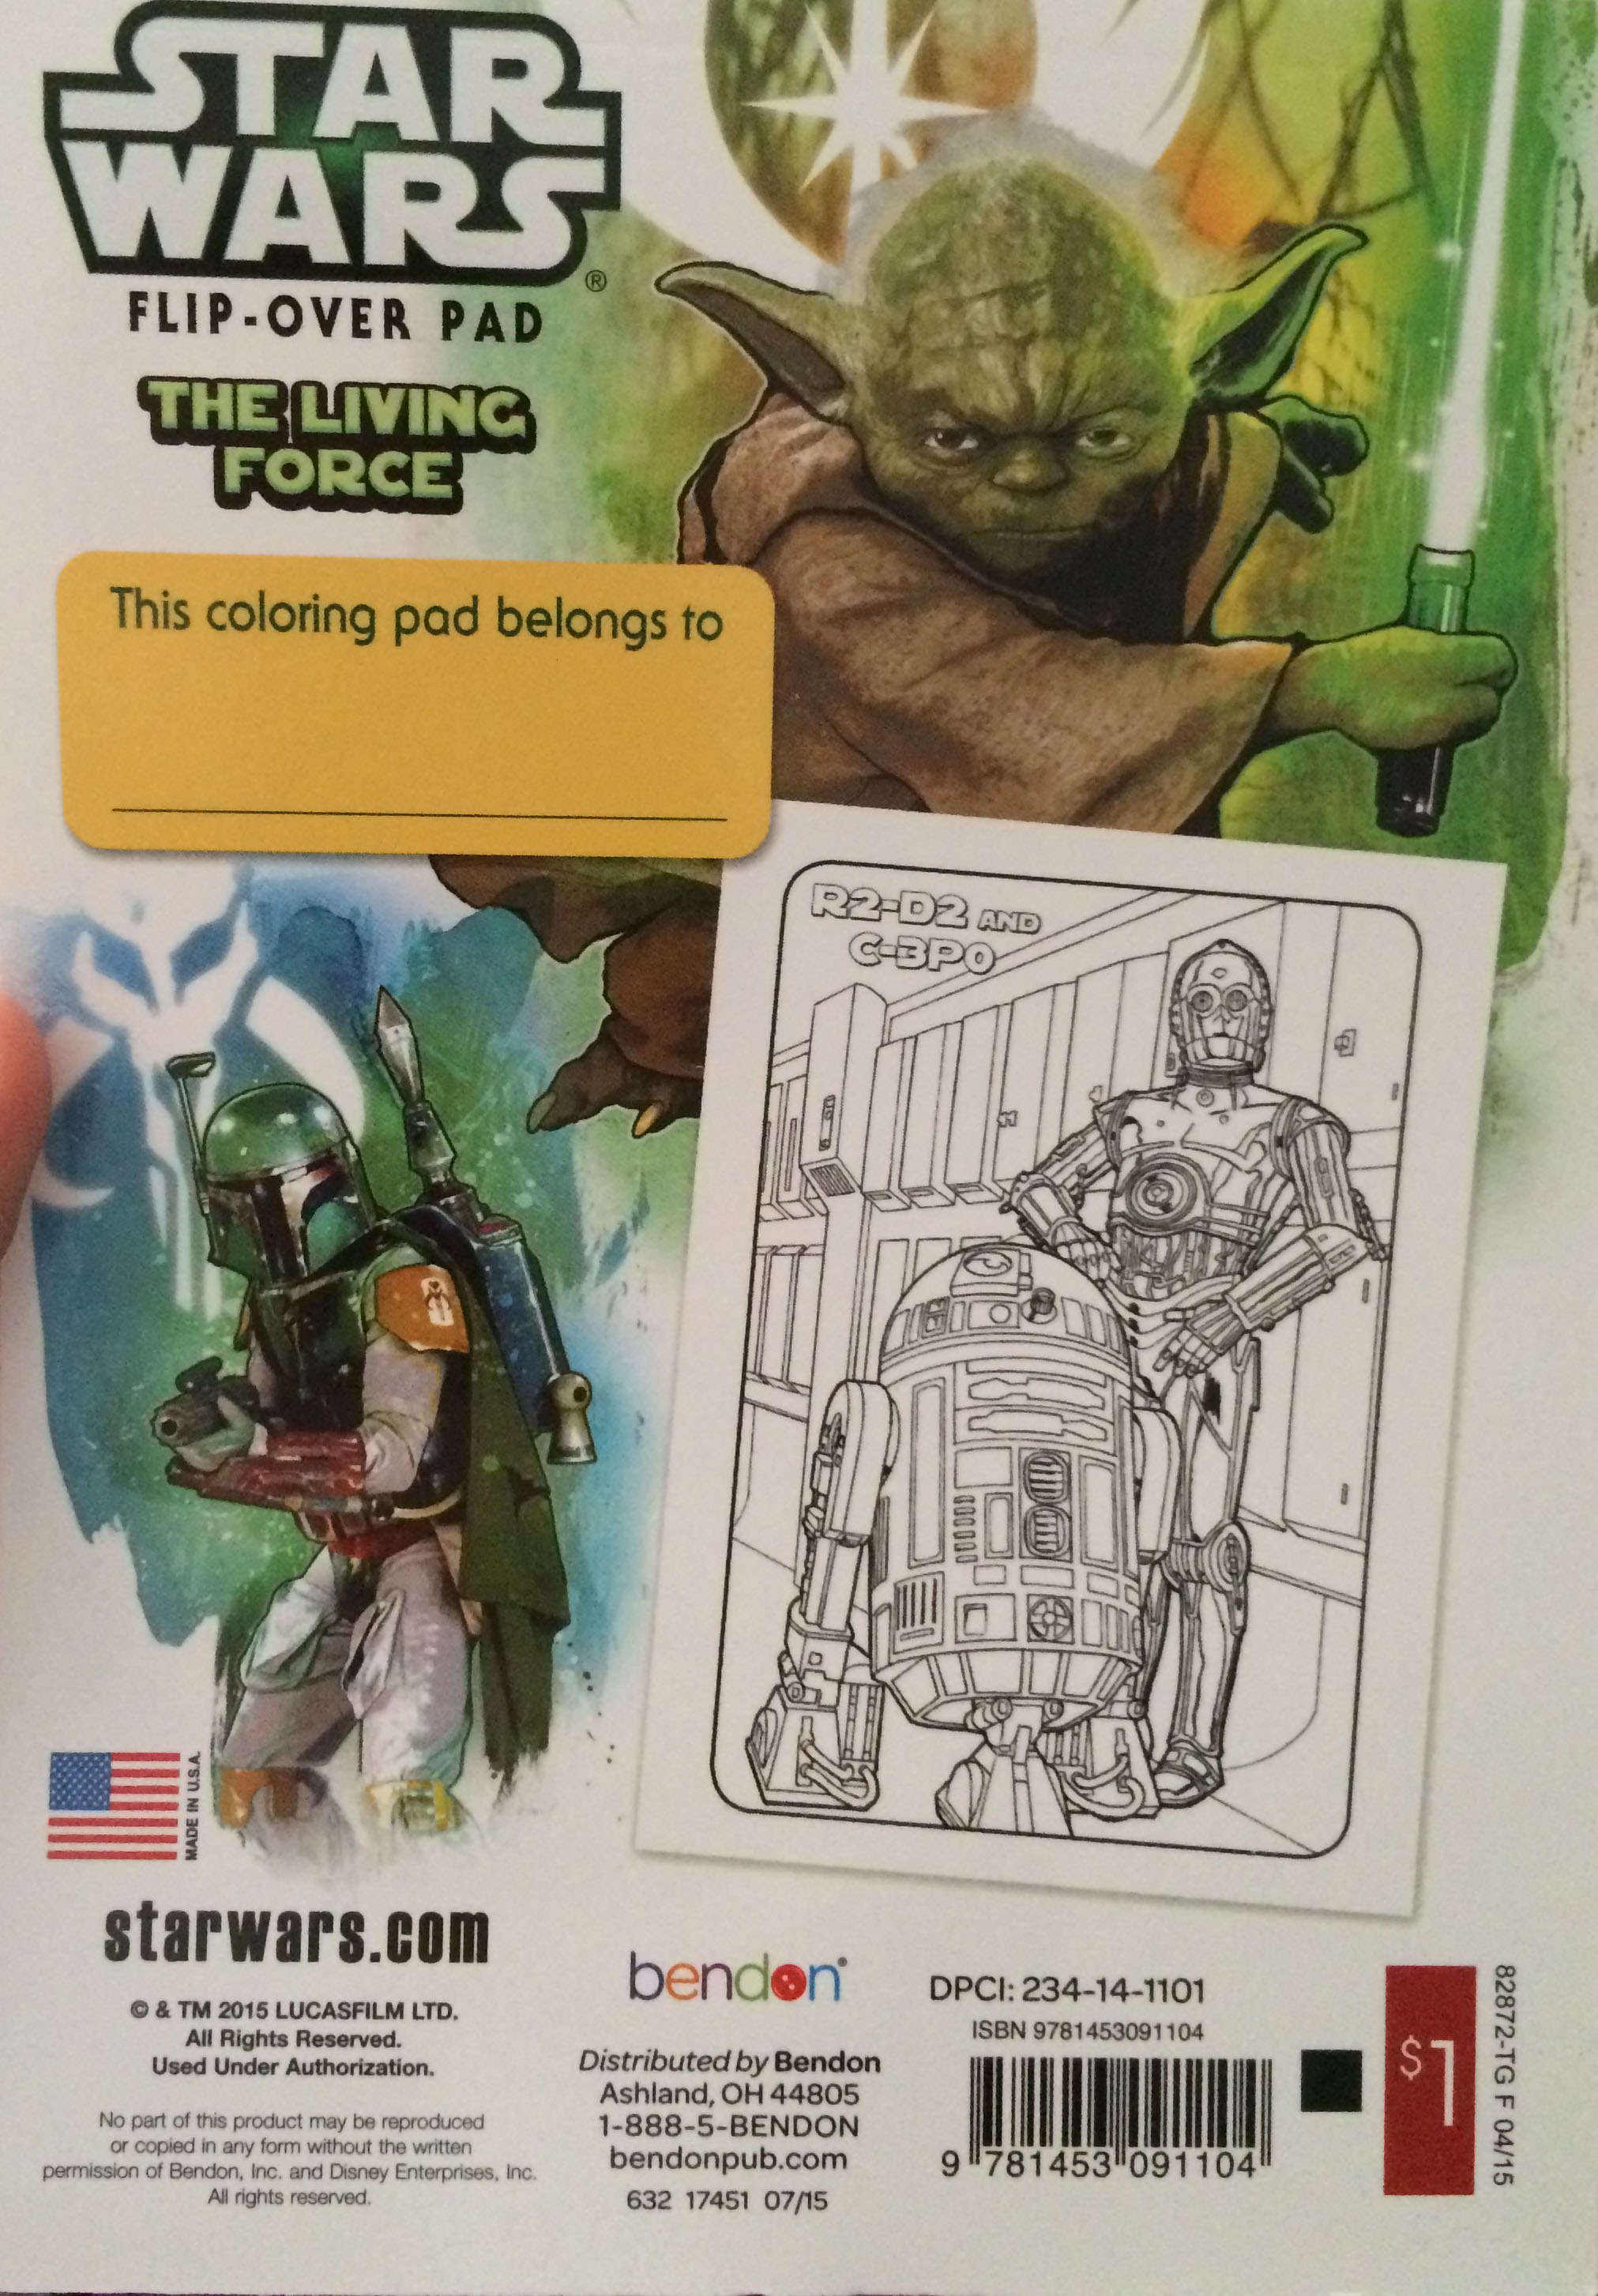 Star Wars: The Living Force Flip-Over Pad (back cover)